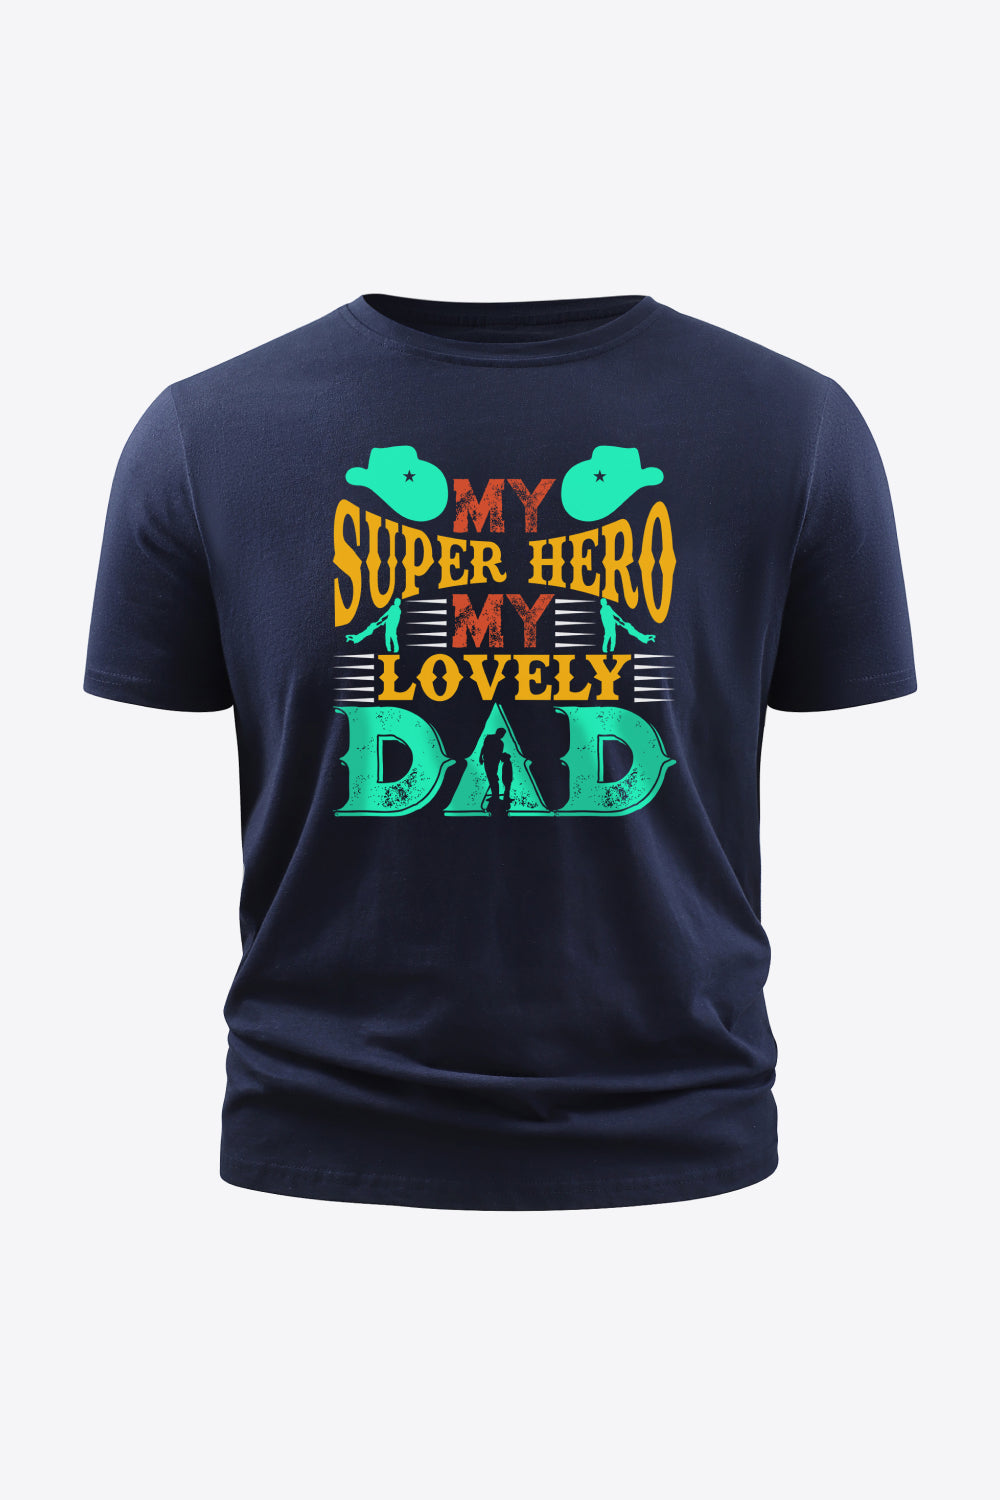 Full Size MY SUPER HERO MY LOVELY DAD Graphic Round Neck Short Sleeve Cotton T-Shirt